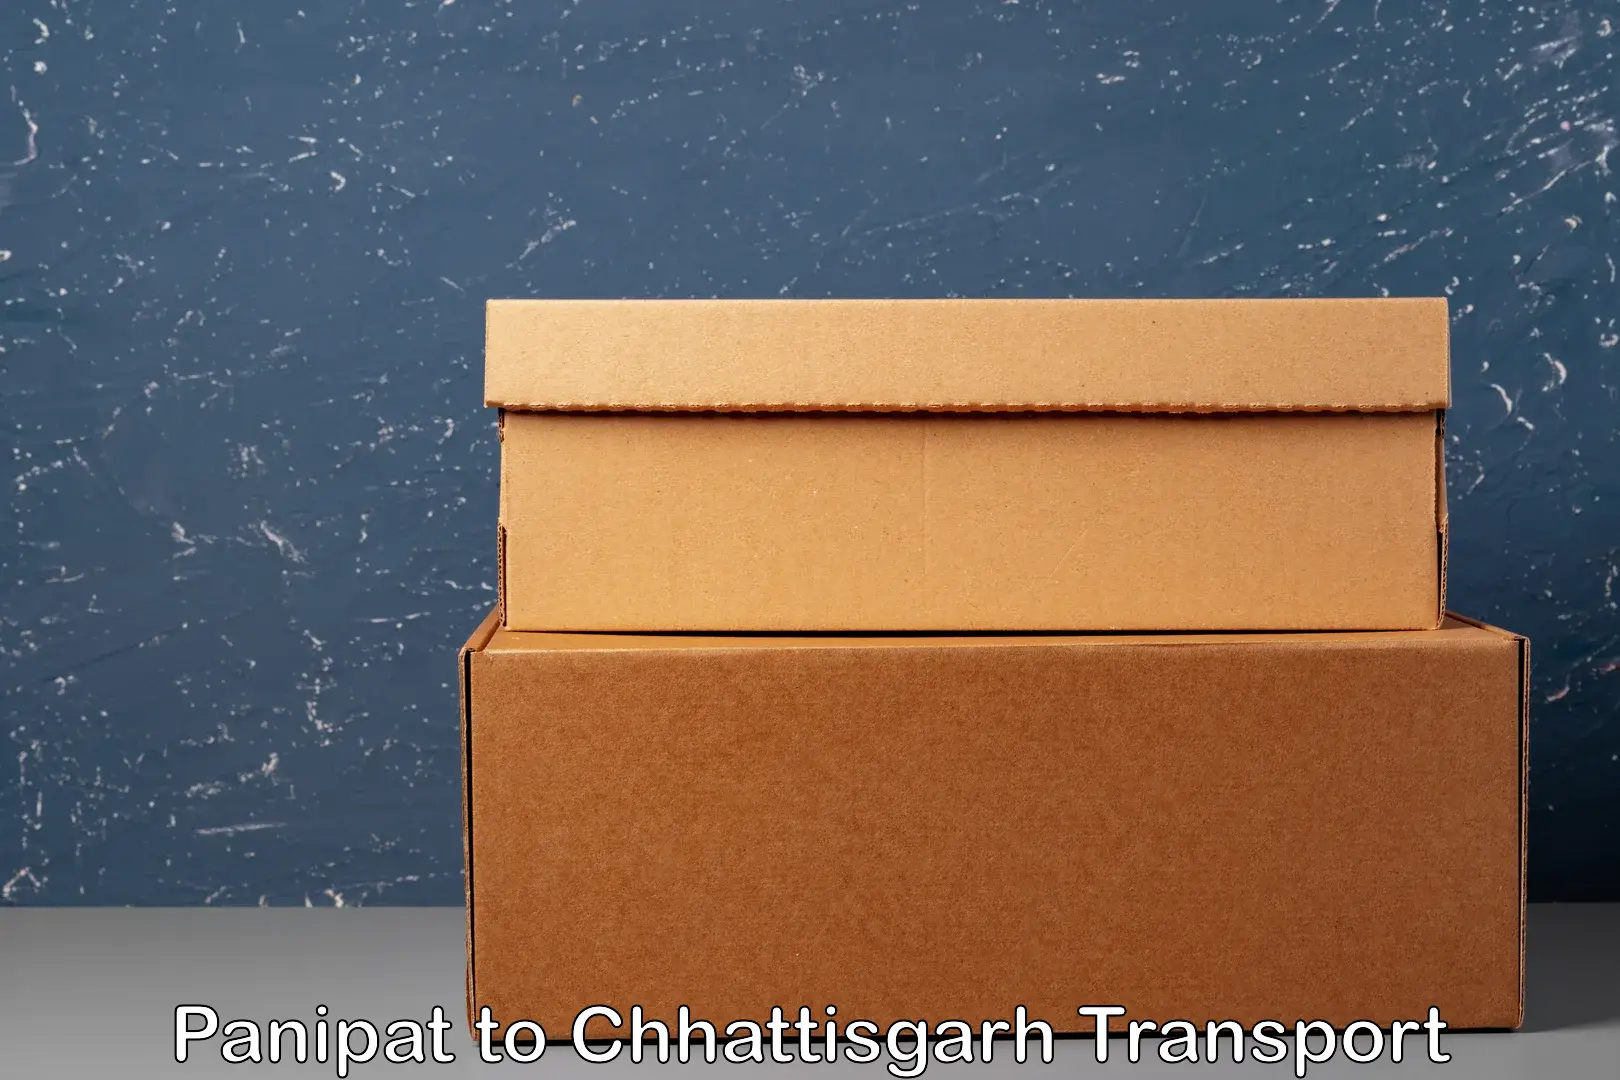 Container transportation services Panipat to Lailunga